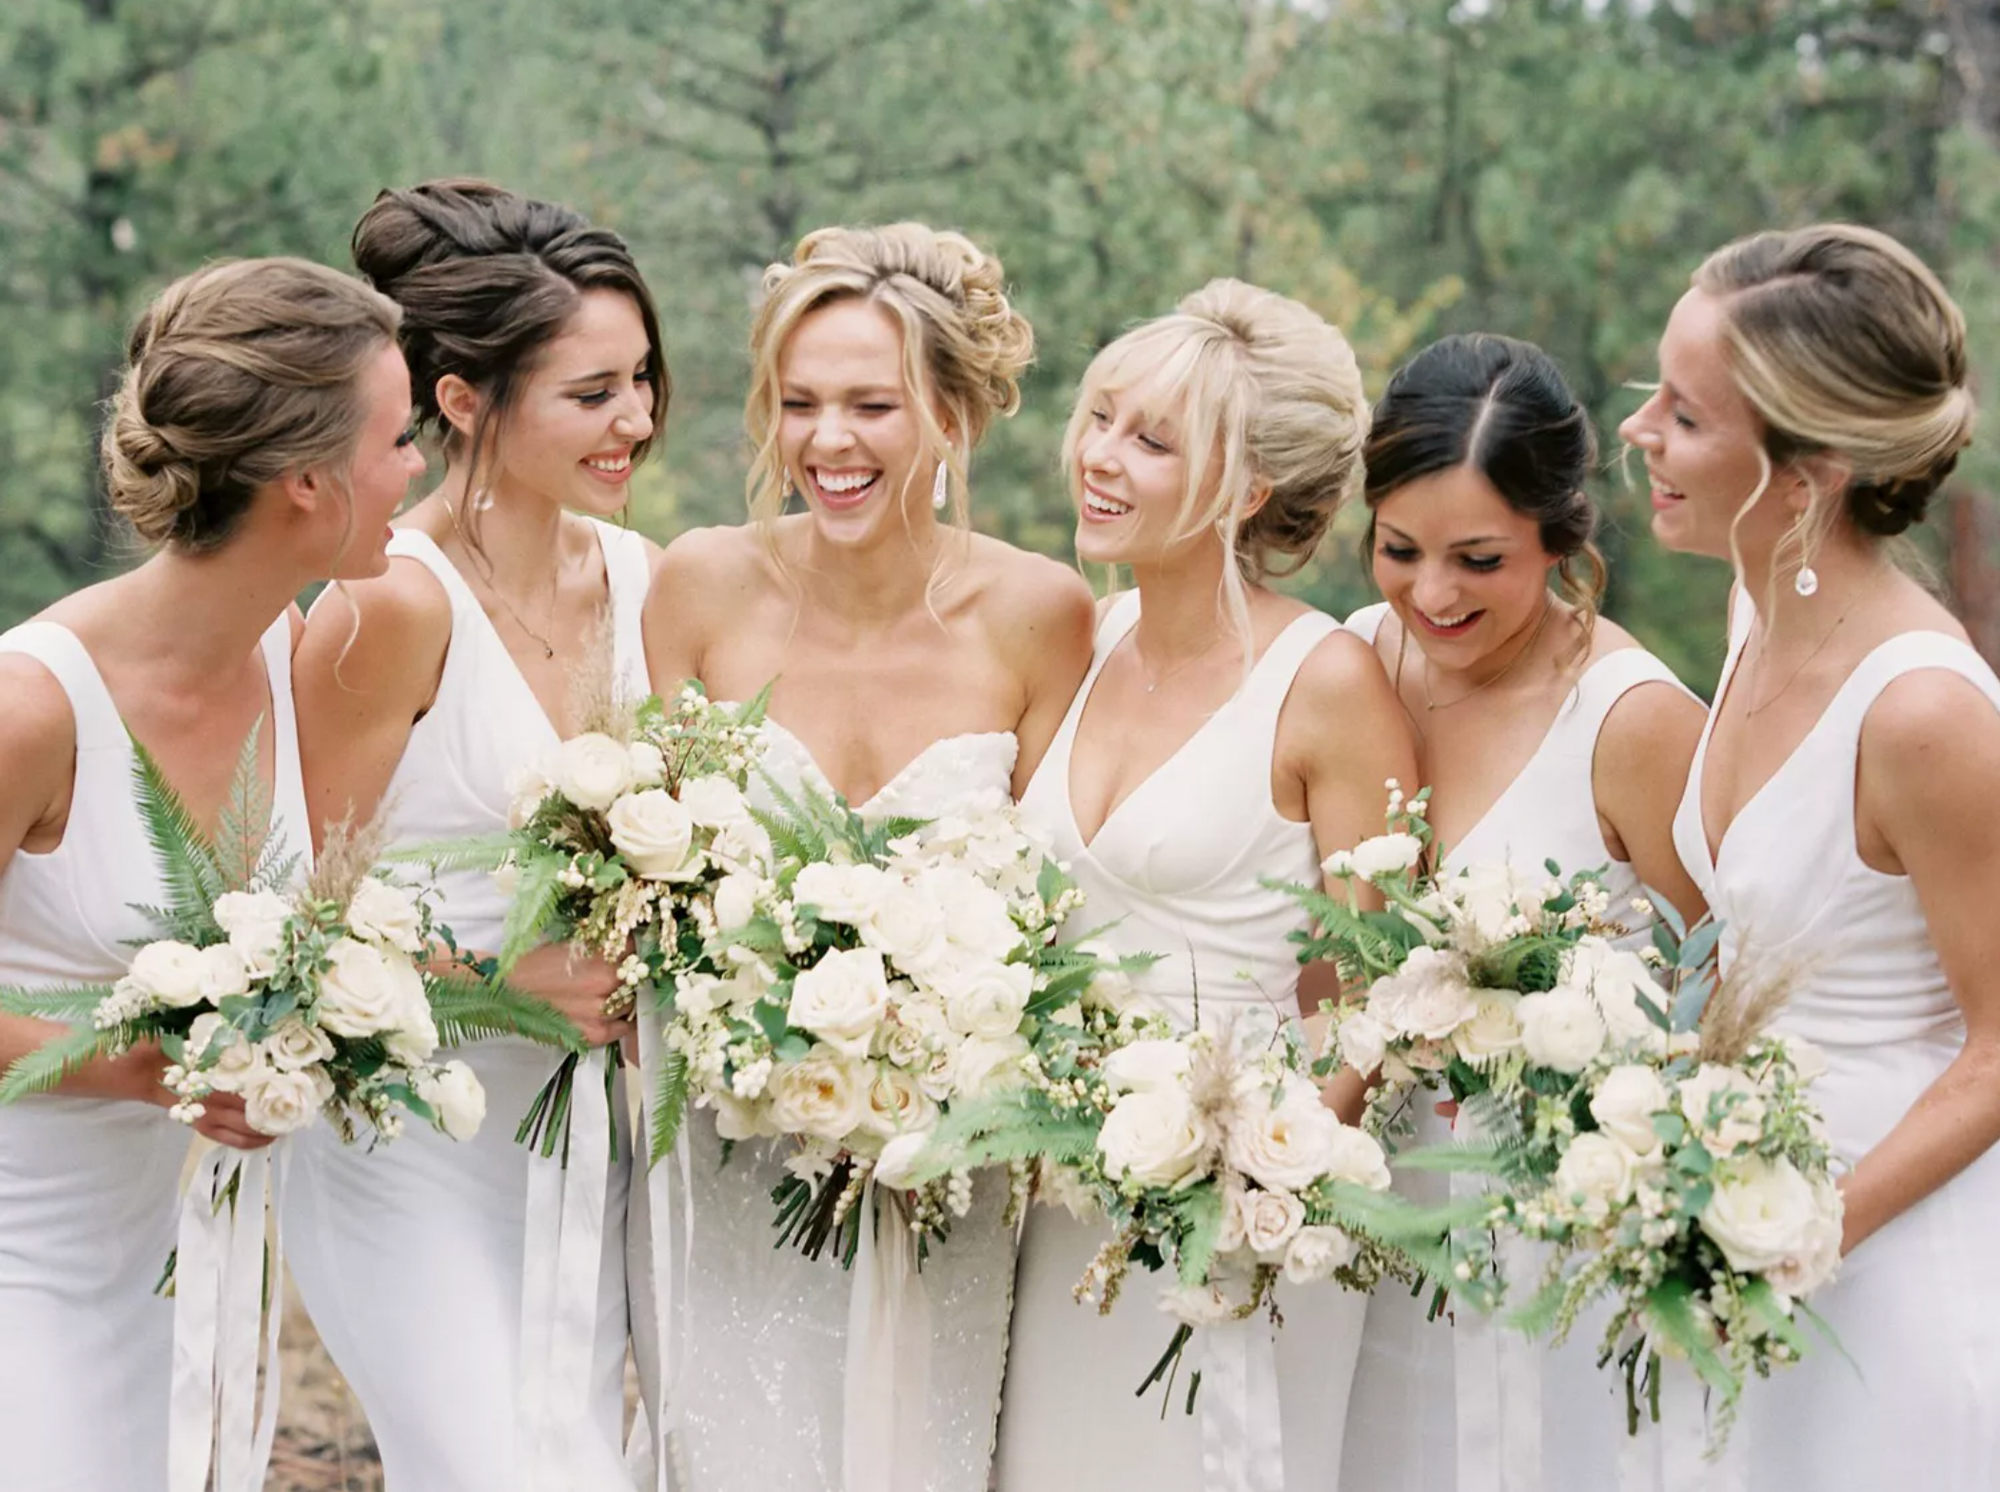 17 Bridesmaid Hairstyles That Will Have Your Girls Looking Great 